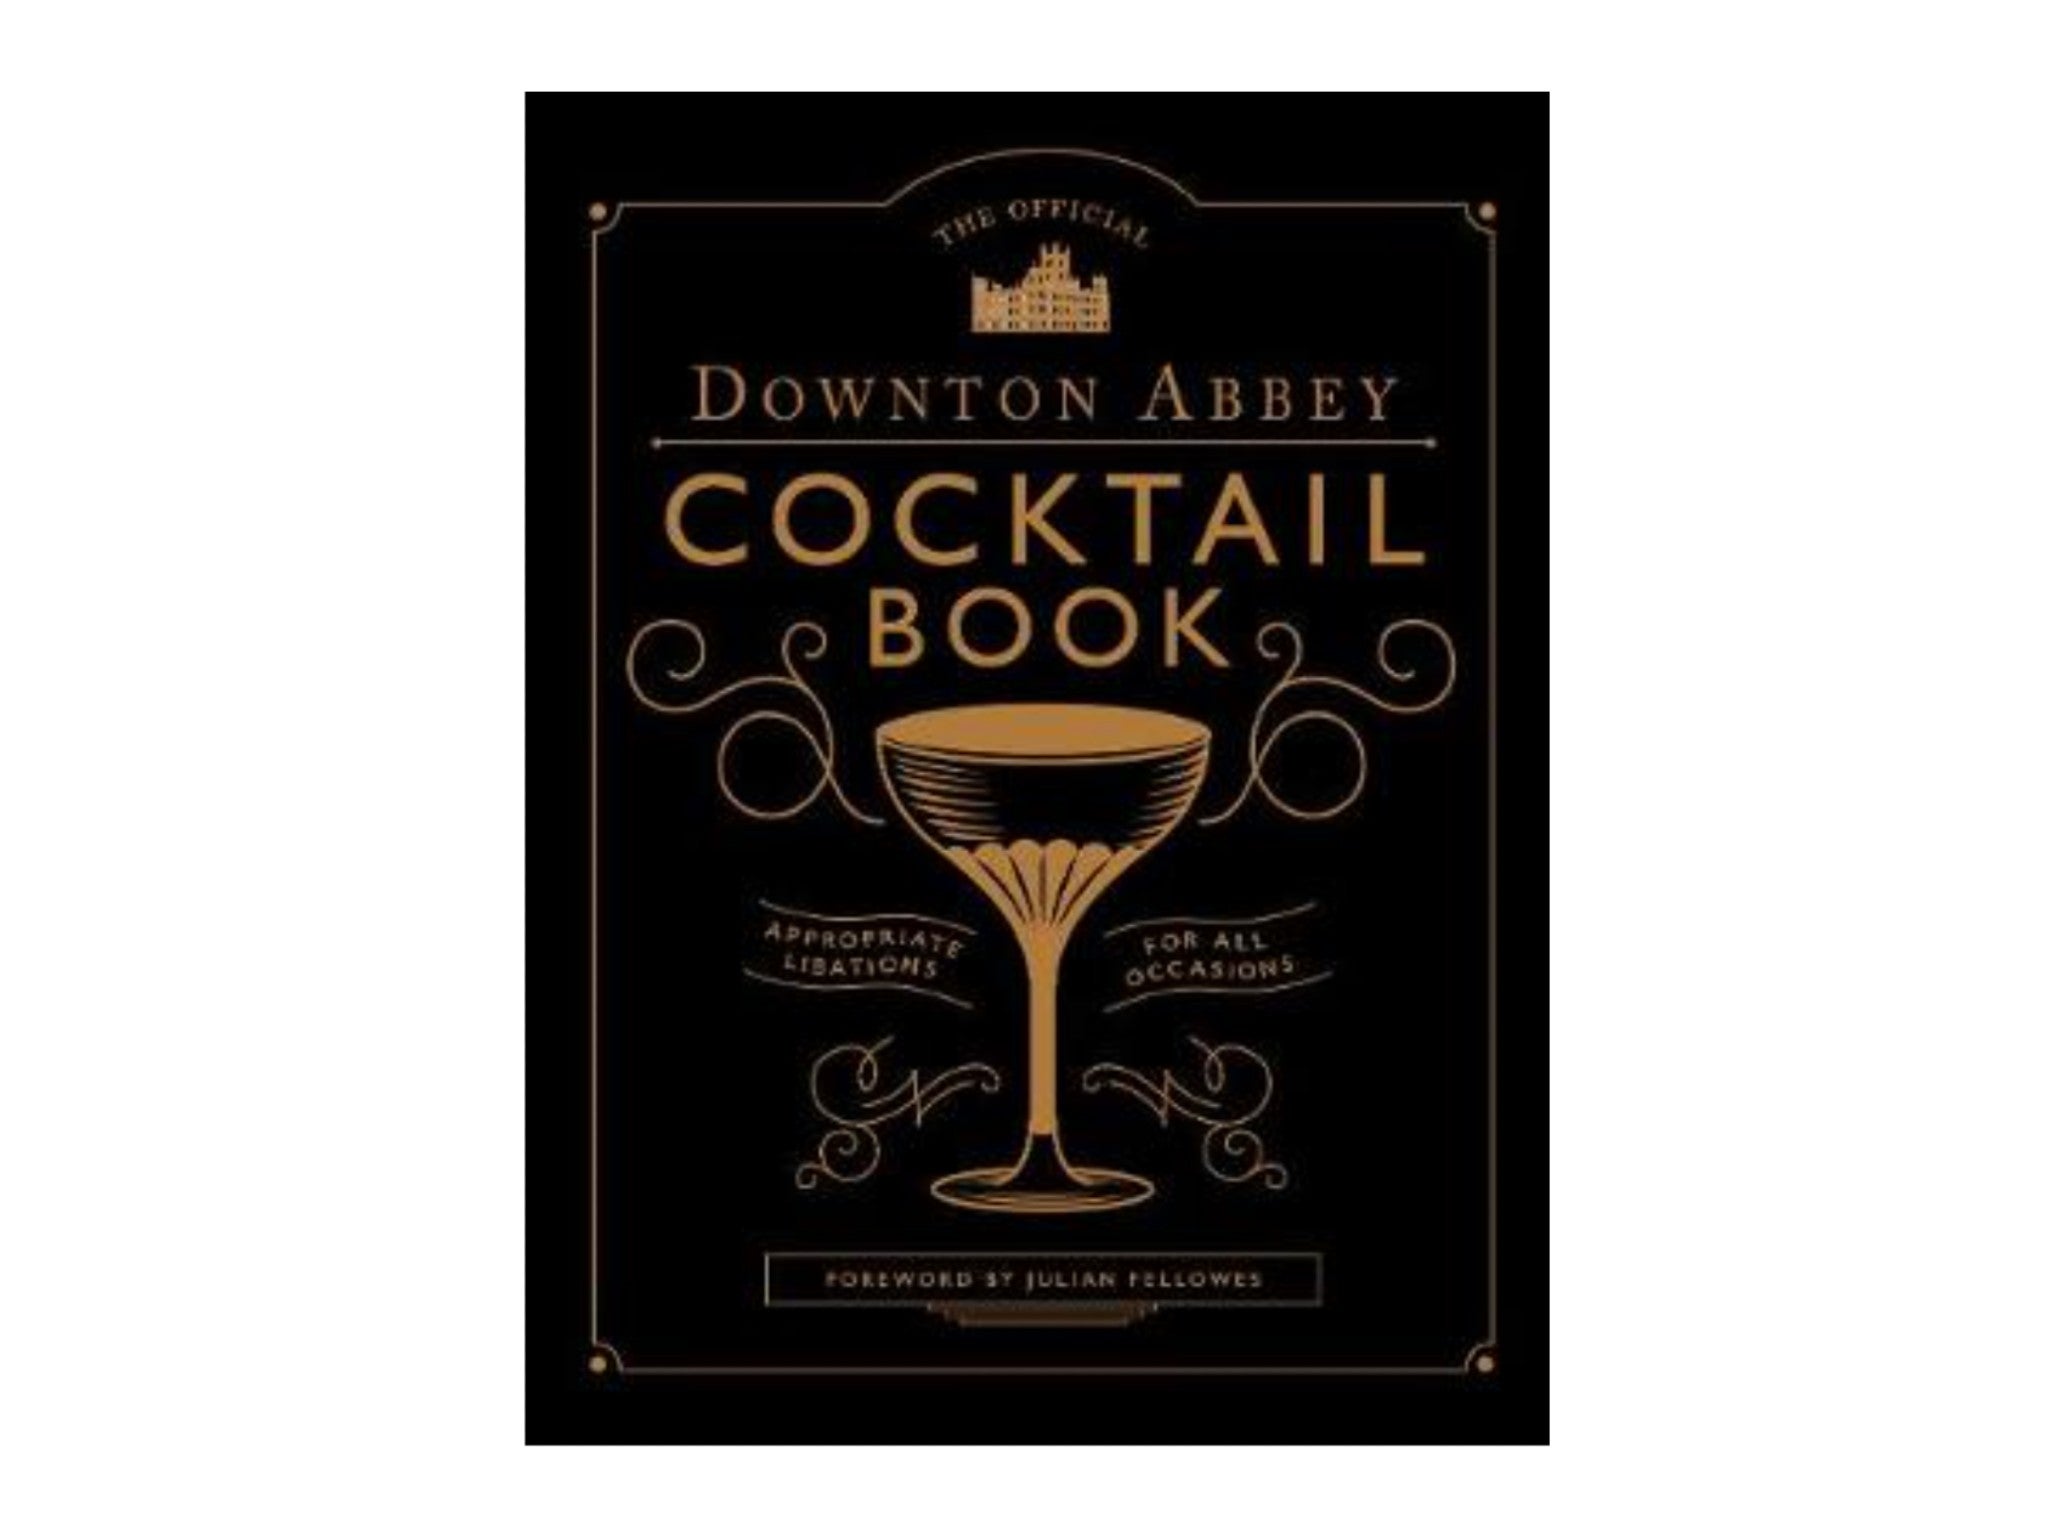 ‘Downtown Abbey Cocktail Book’  indybest.jpeg